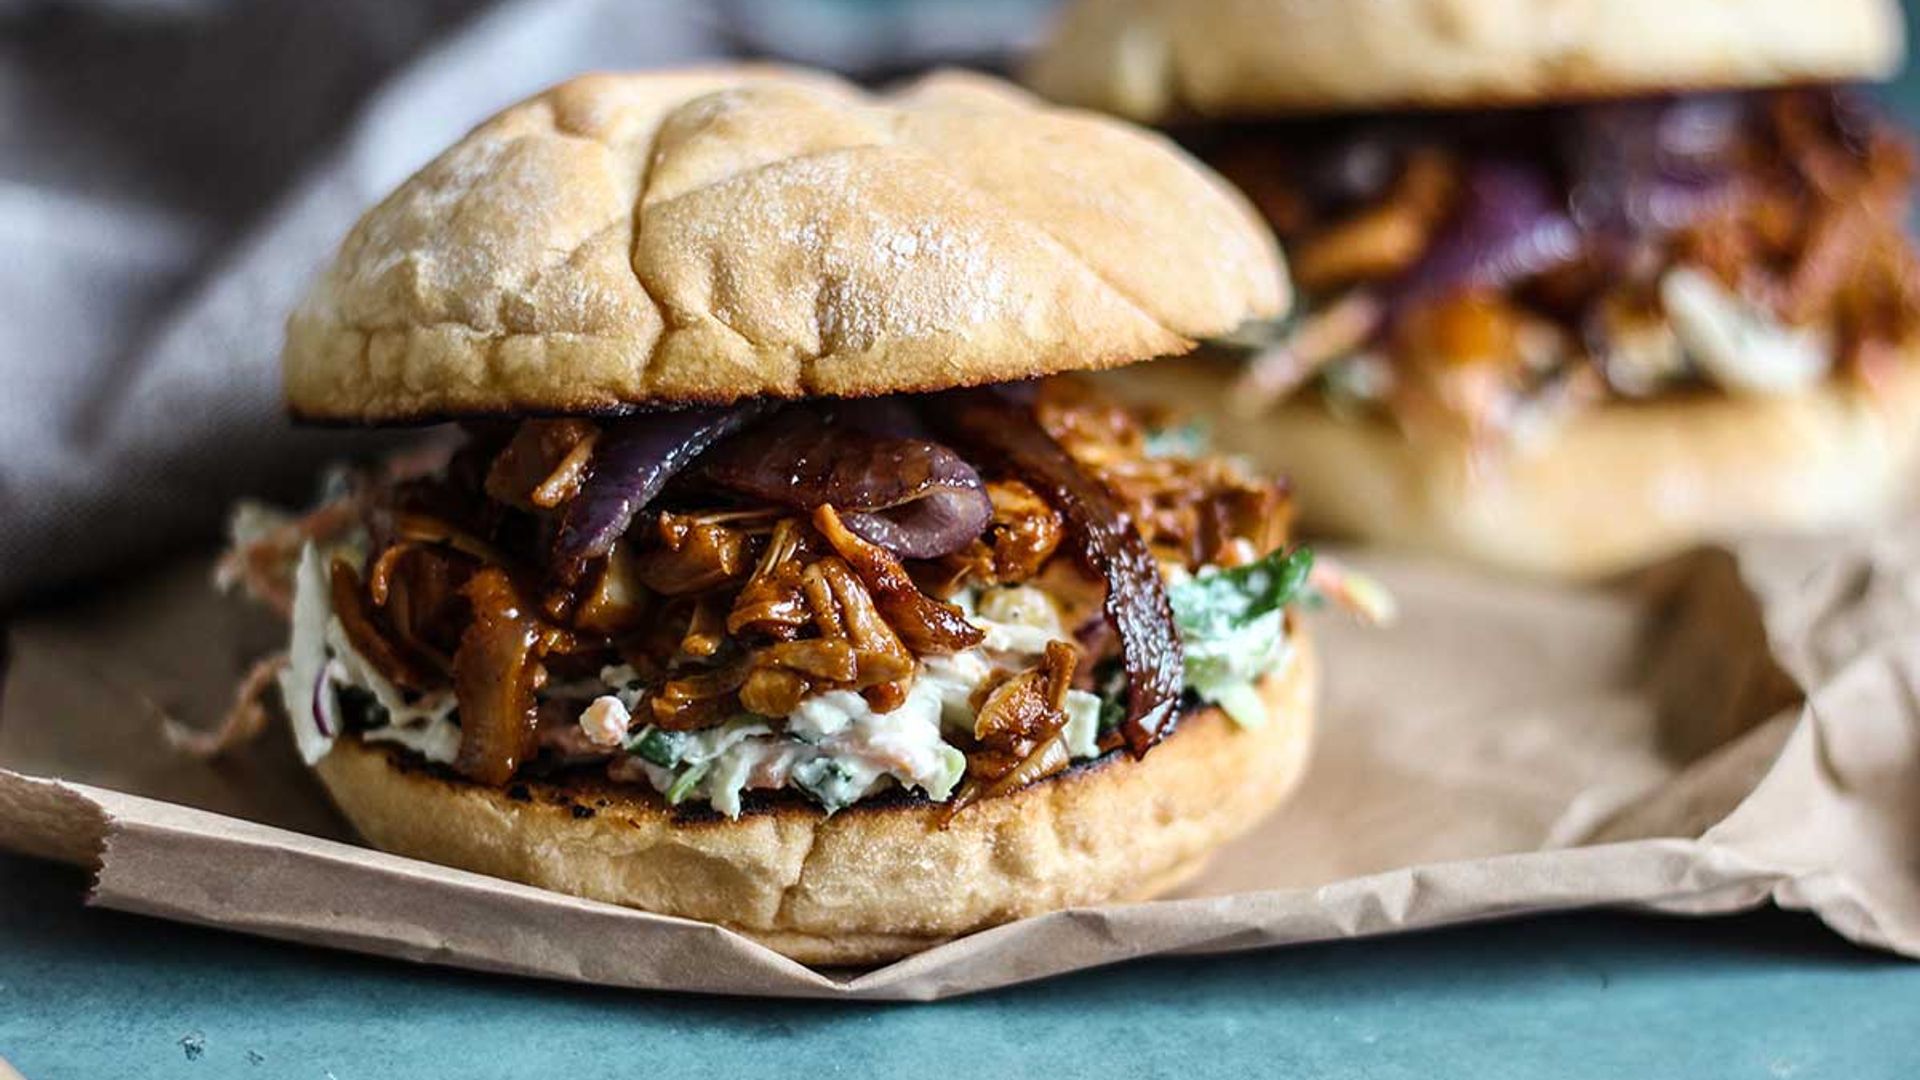 These Vegan pulled 'pork' sliders taste just like the real thing - and they come with Vegan slaw